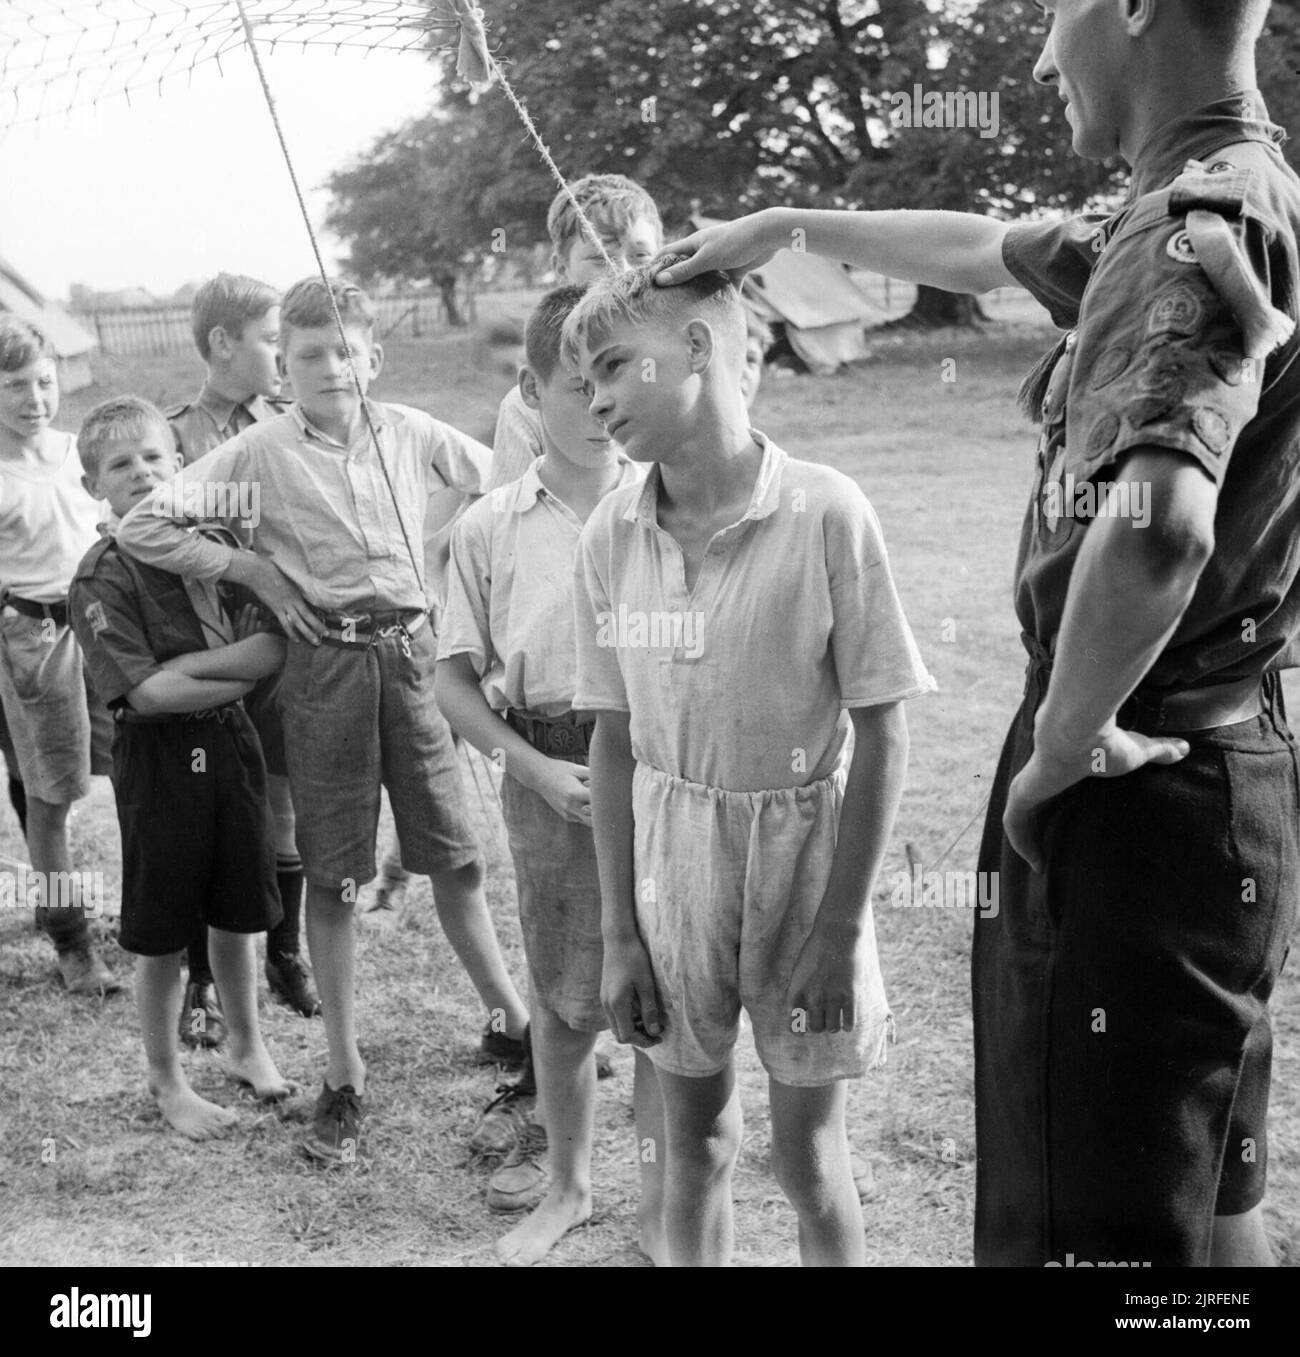 Boy Scouts queue up for their morning inspection at a fruit-picking camp near Cambridge in 1943. Boy Scouts queue up for their morning inspection at a fruit-picking camp near Cambridge. The Scout Leader checks their ears and necks to make sure they are clean before they set off for work in the plum orchards. Stock Photo